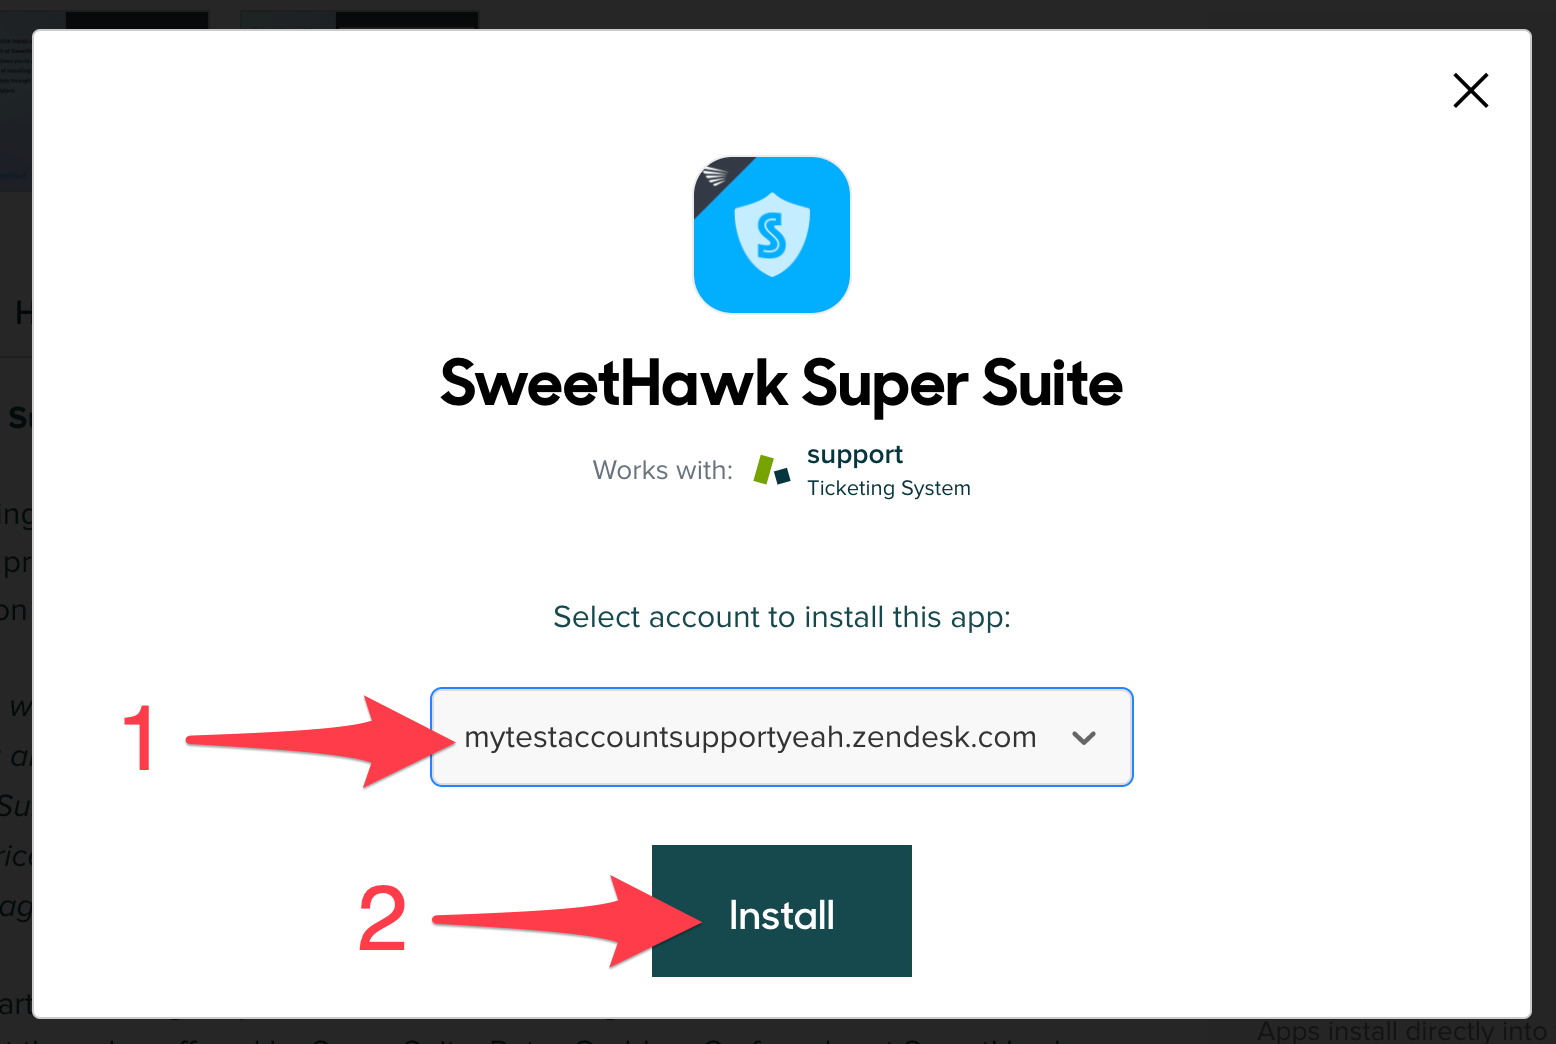 SweetHawk_Super_Suite_App_Integration_with_Zendesk_Support.png